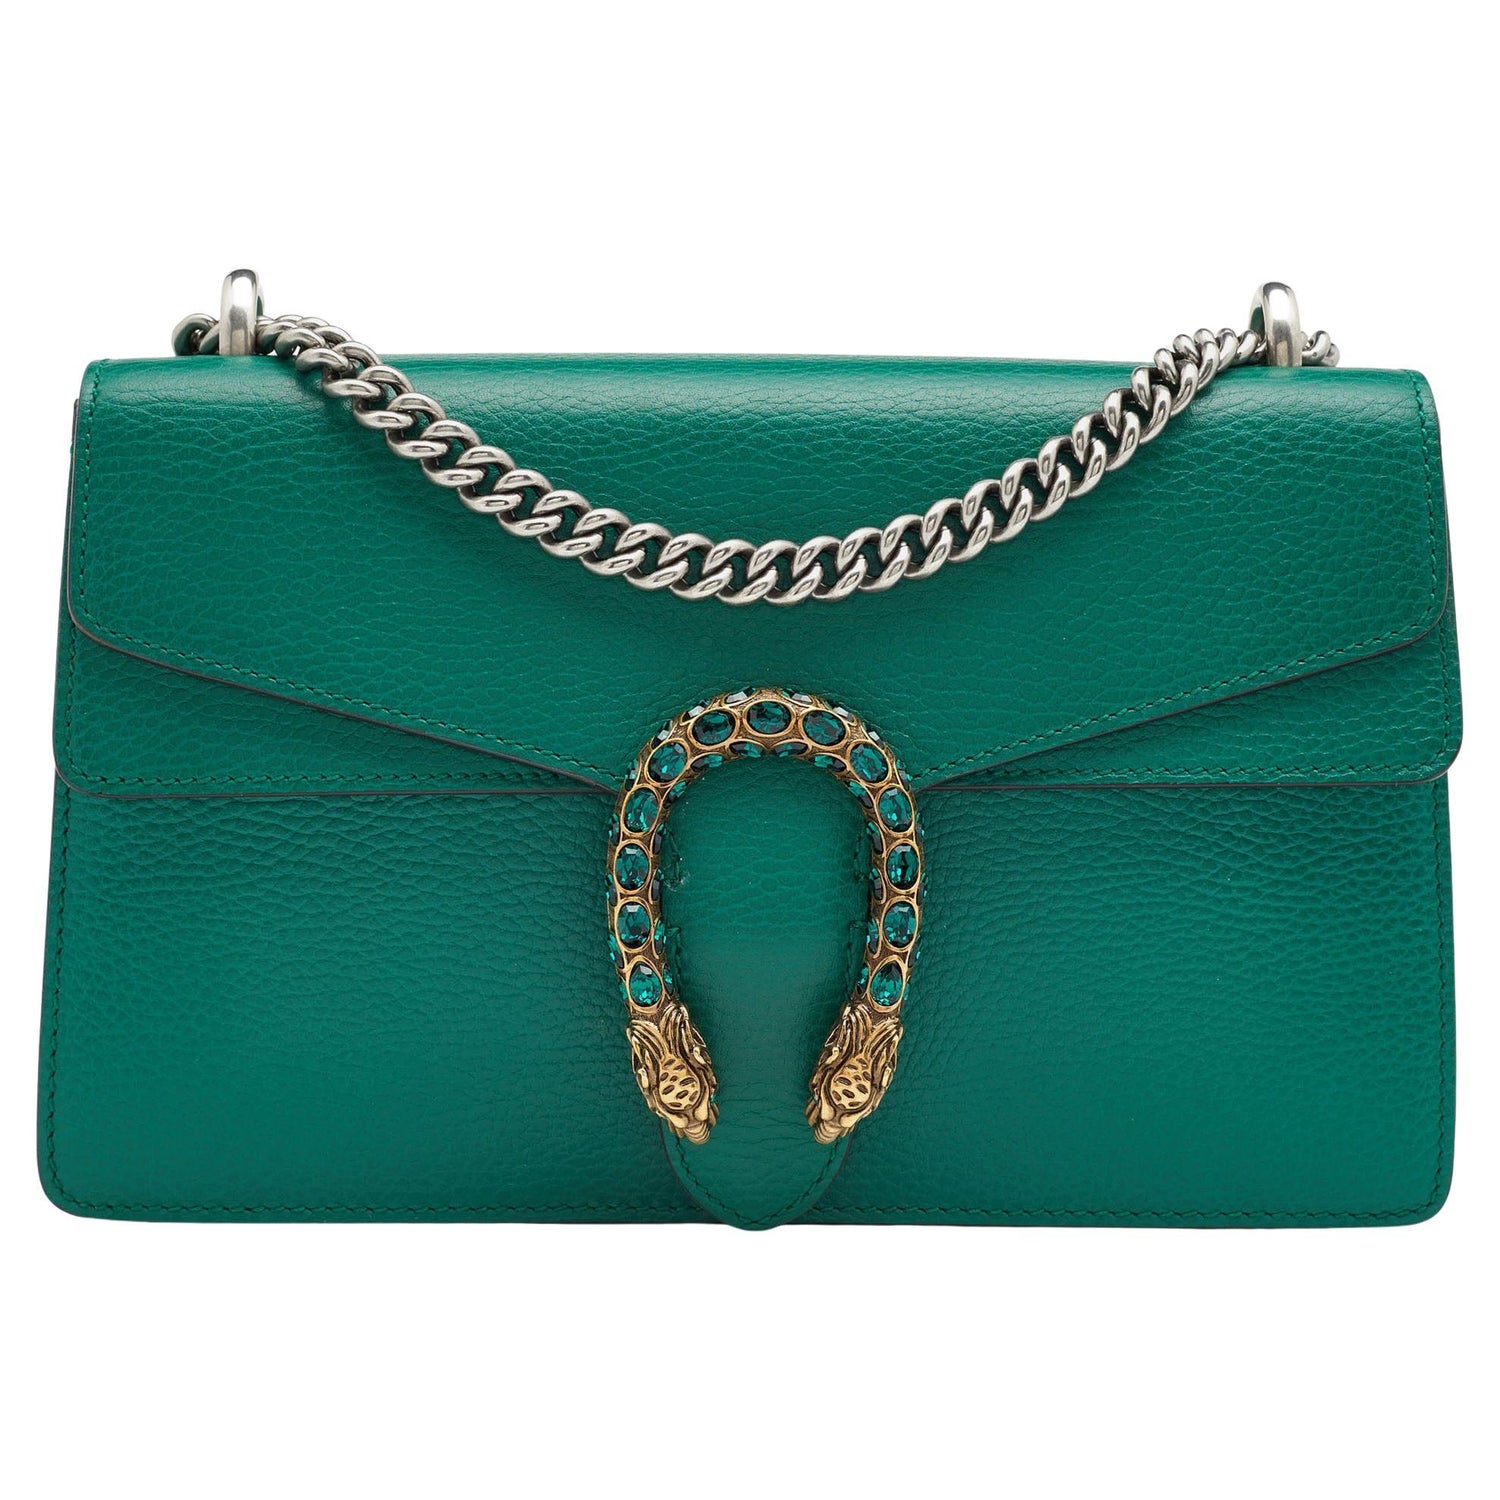 Gucci Leather Small Dionysus Shoulder Bag 1stDibs | gucci green bag, gucci green dionysus, mini dionysus green